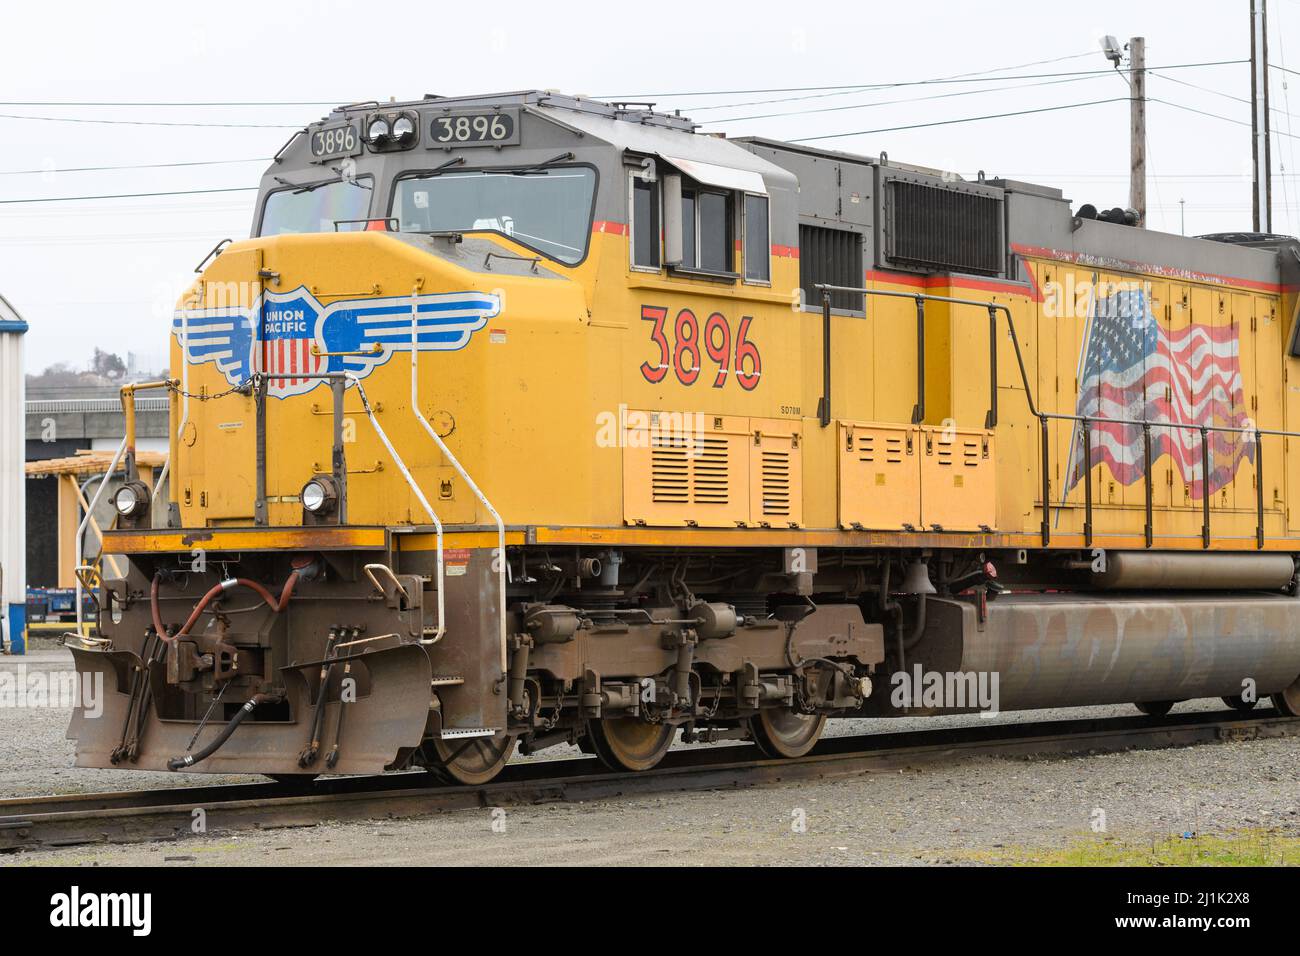 Seattle - March 20, 2022; Union Pacific locomotive in yellow with logo and US flag at Seattle Argo Yard, a UP intermodal freight facility Stock Photo